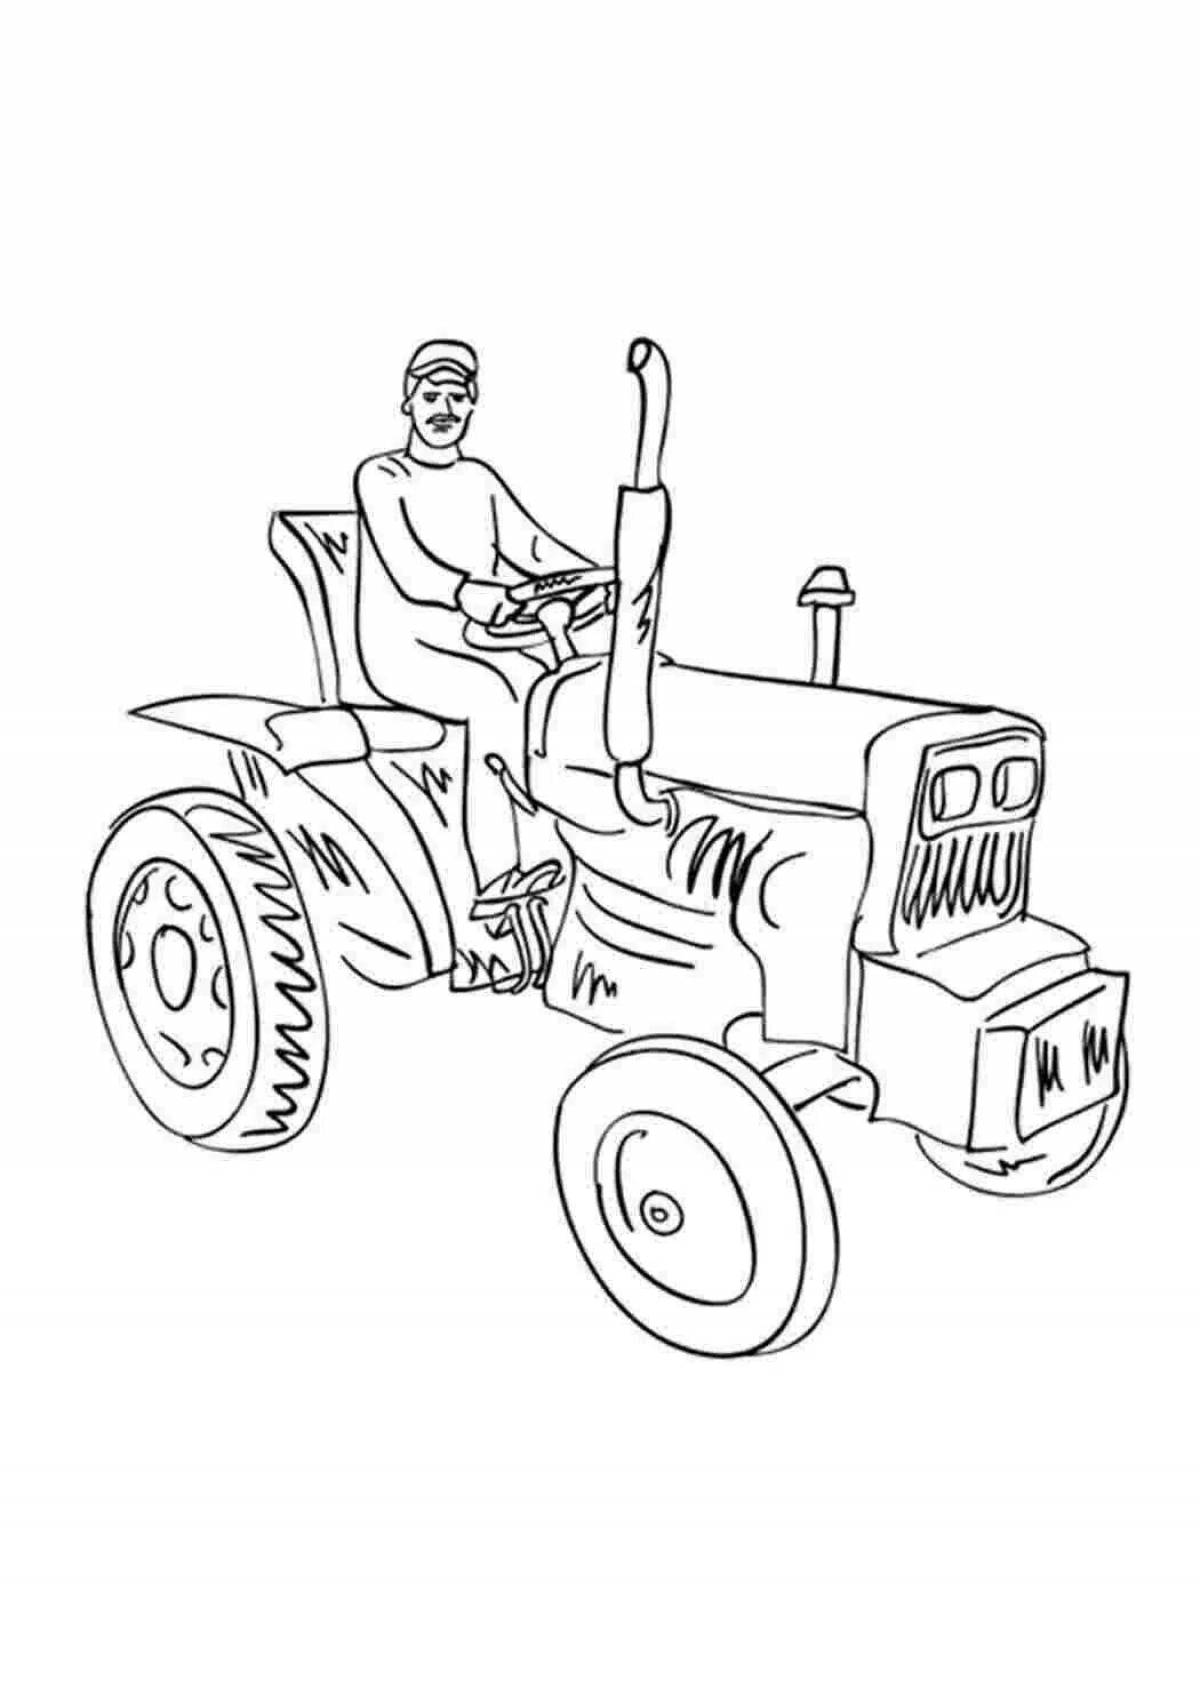 Exciting coloring of the walk-behind tractor